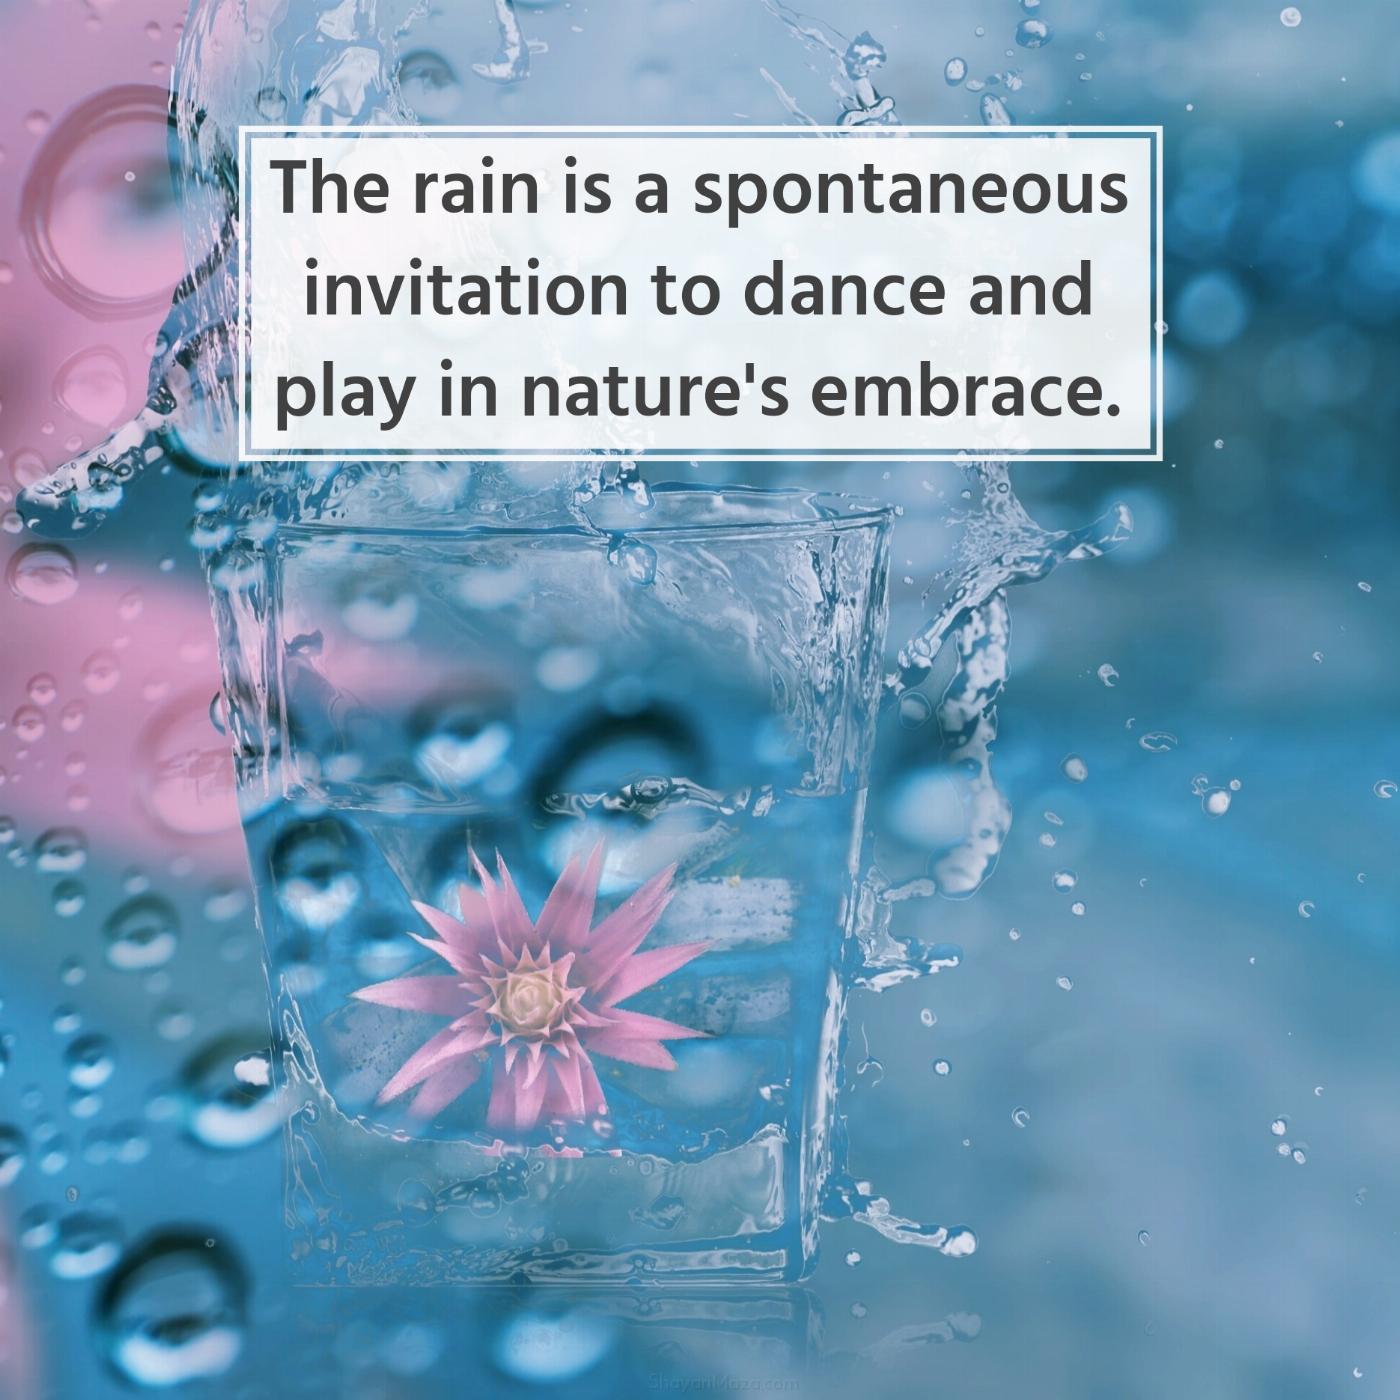 The rain is a spontaneous invitation to dance and play in nature's embrace